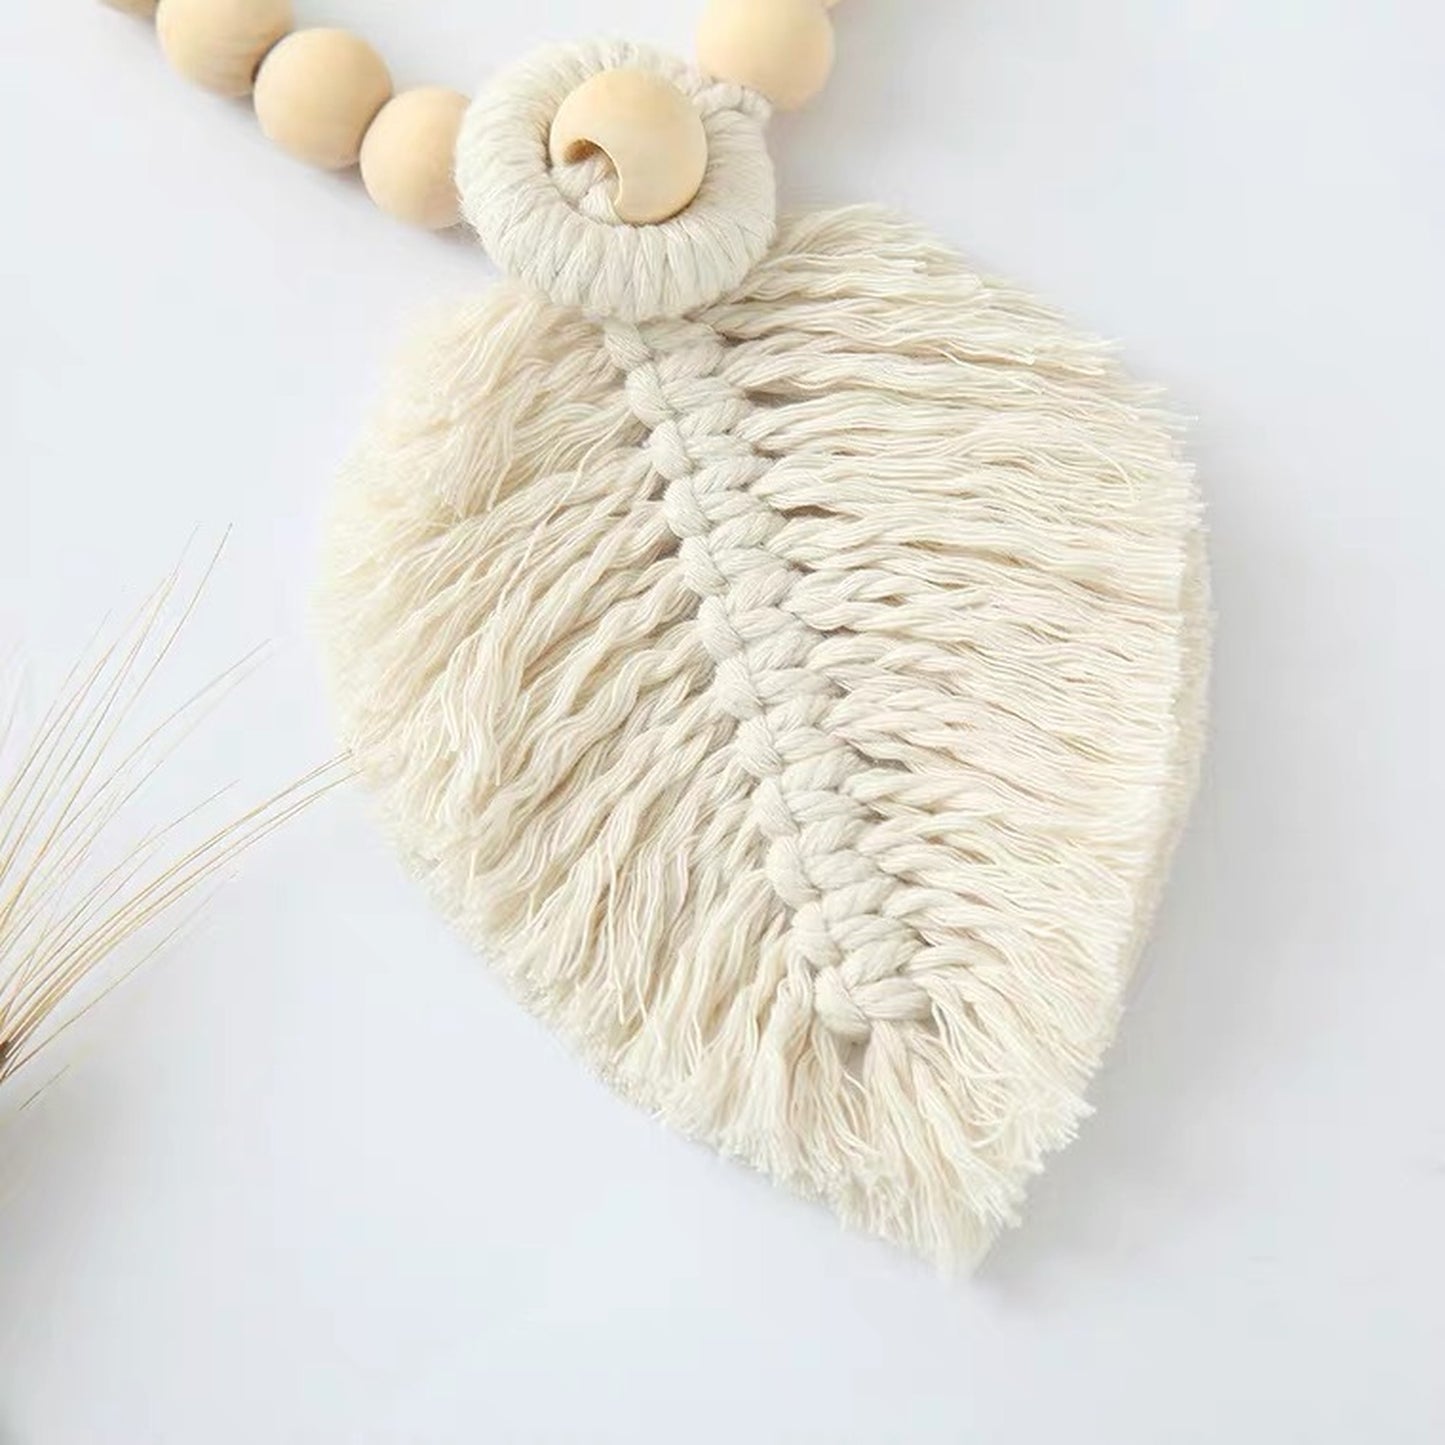 wooden beads feather curtain holder